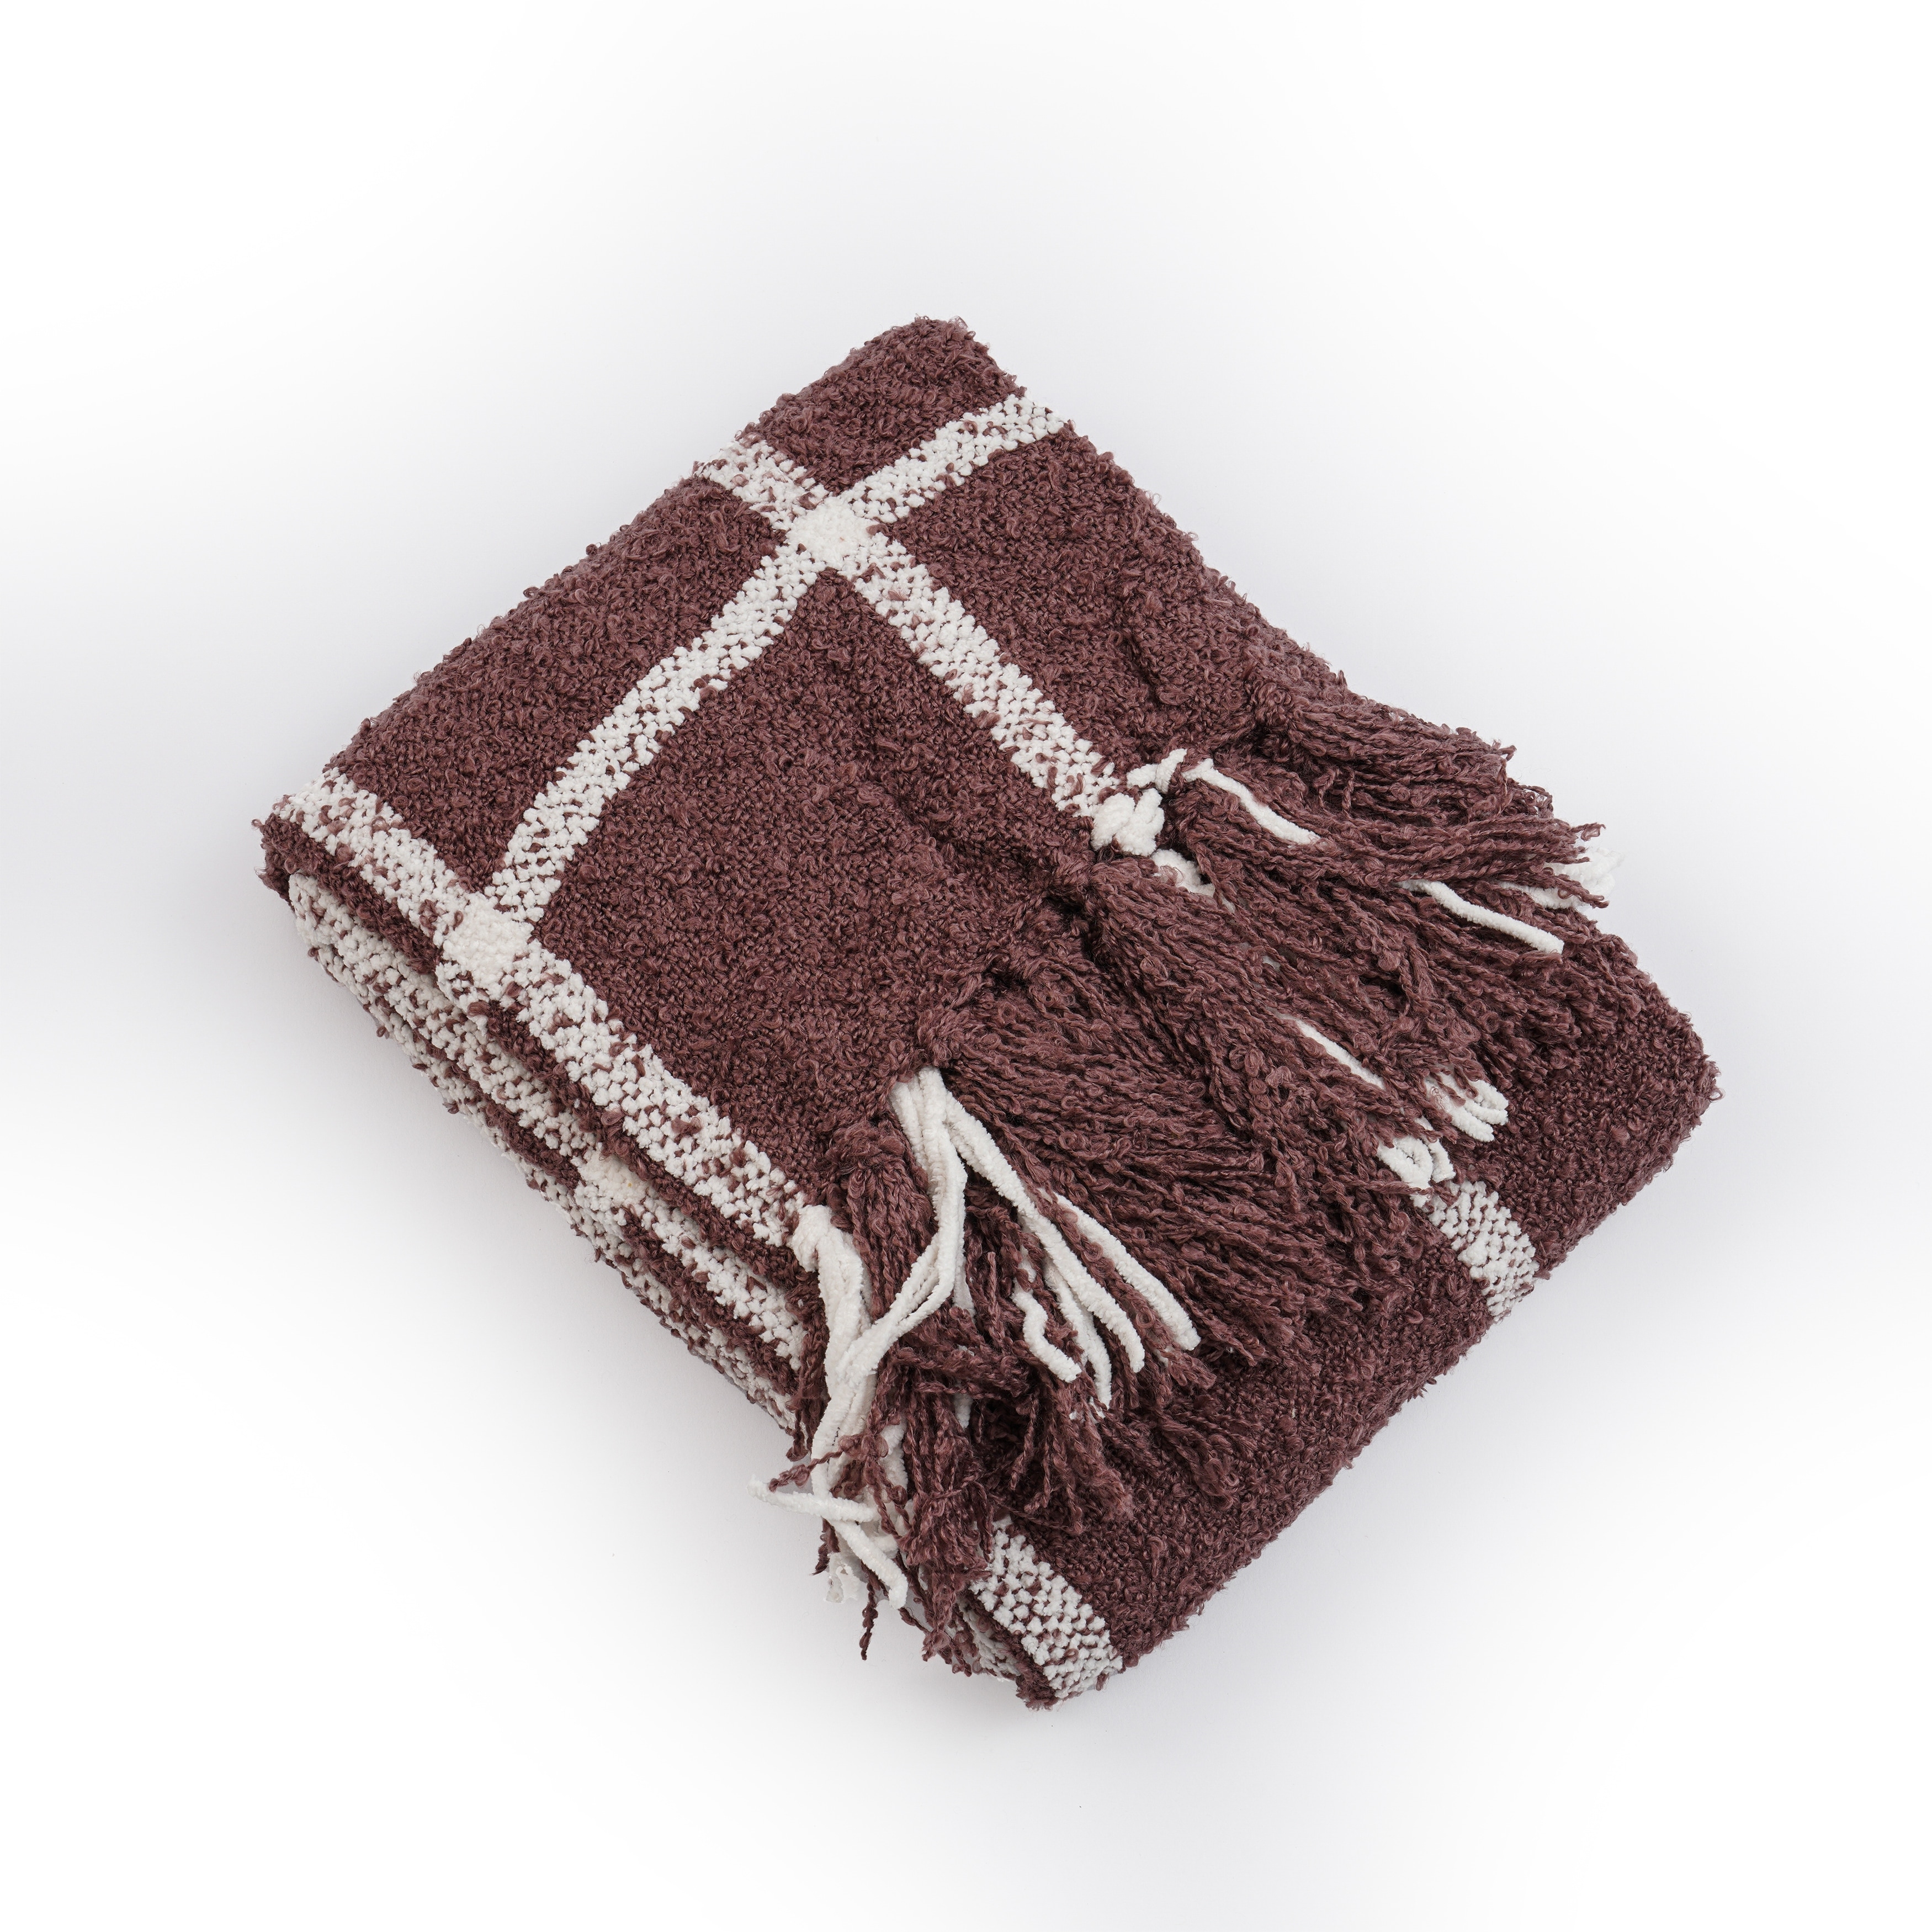 EverGrace Plaid Boucle Woven Throw Blanket 60 X 50 Inch Overstock 31291836 50 W X 60 L Inches Mauve